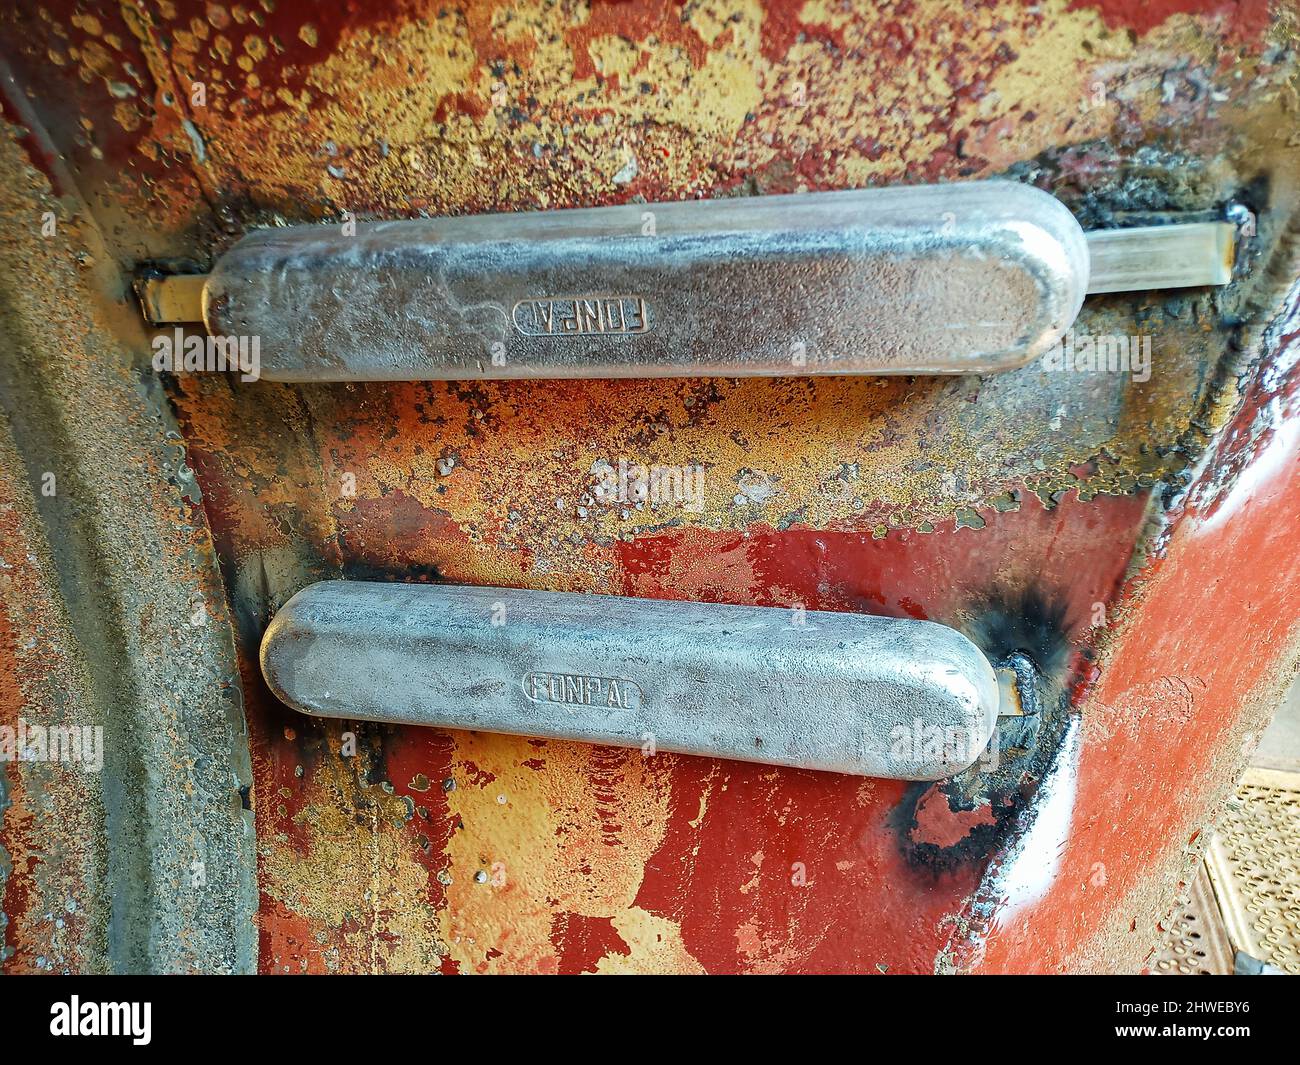 bow thruster of a ship,ships bow thruster,cathodic protection in ships hull,ships hull,hull of a ship,thruster,protection from corrossionand rust Stock Photo